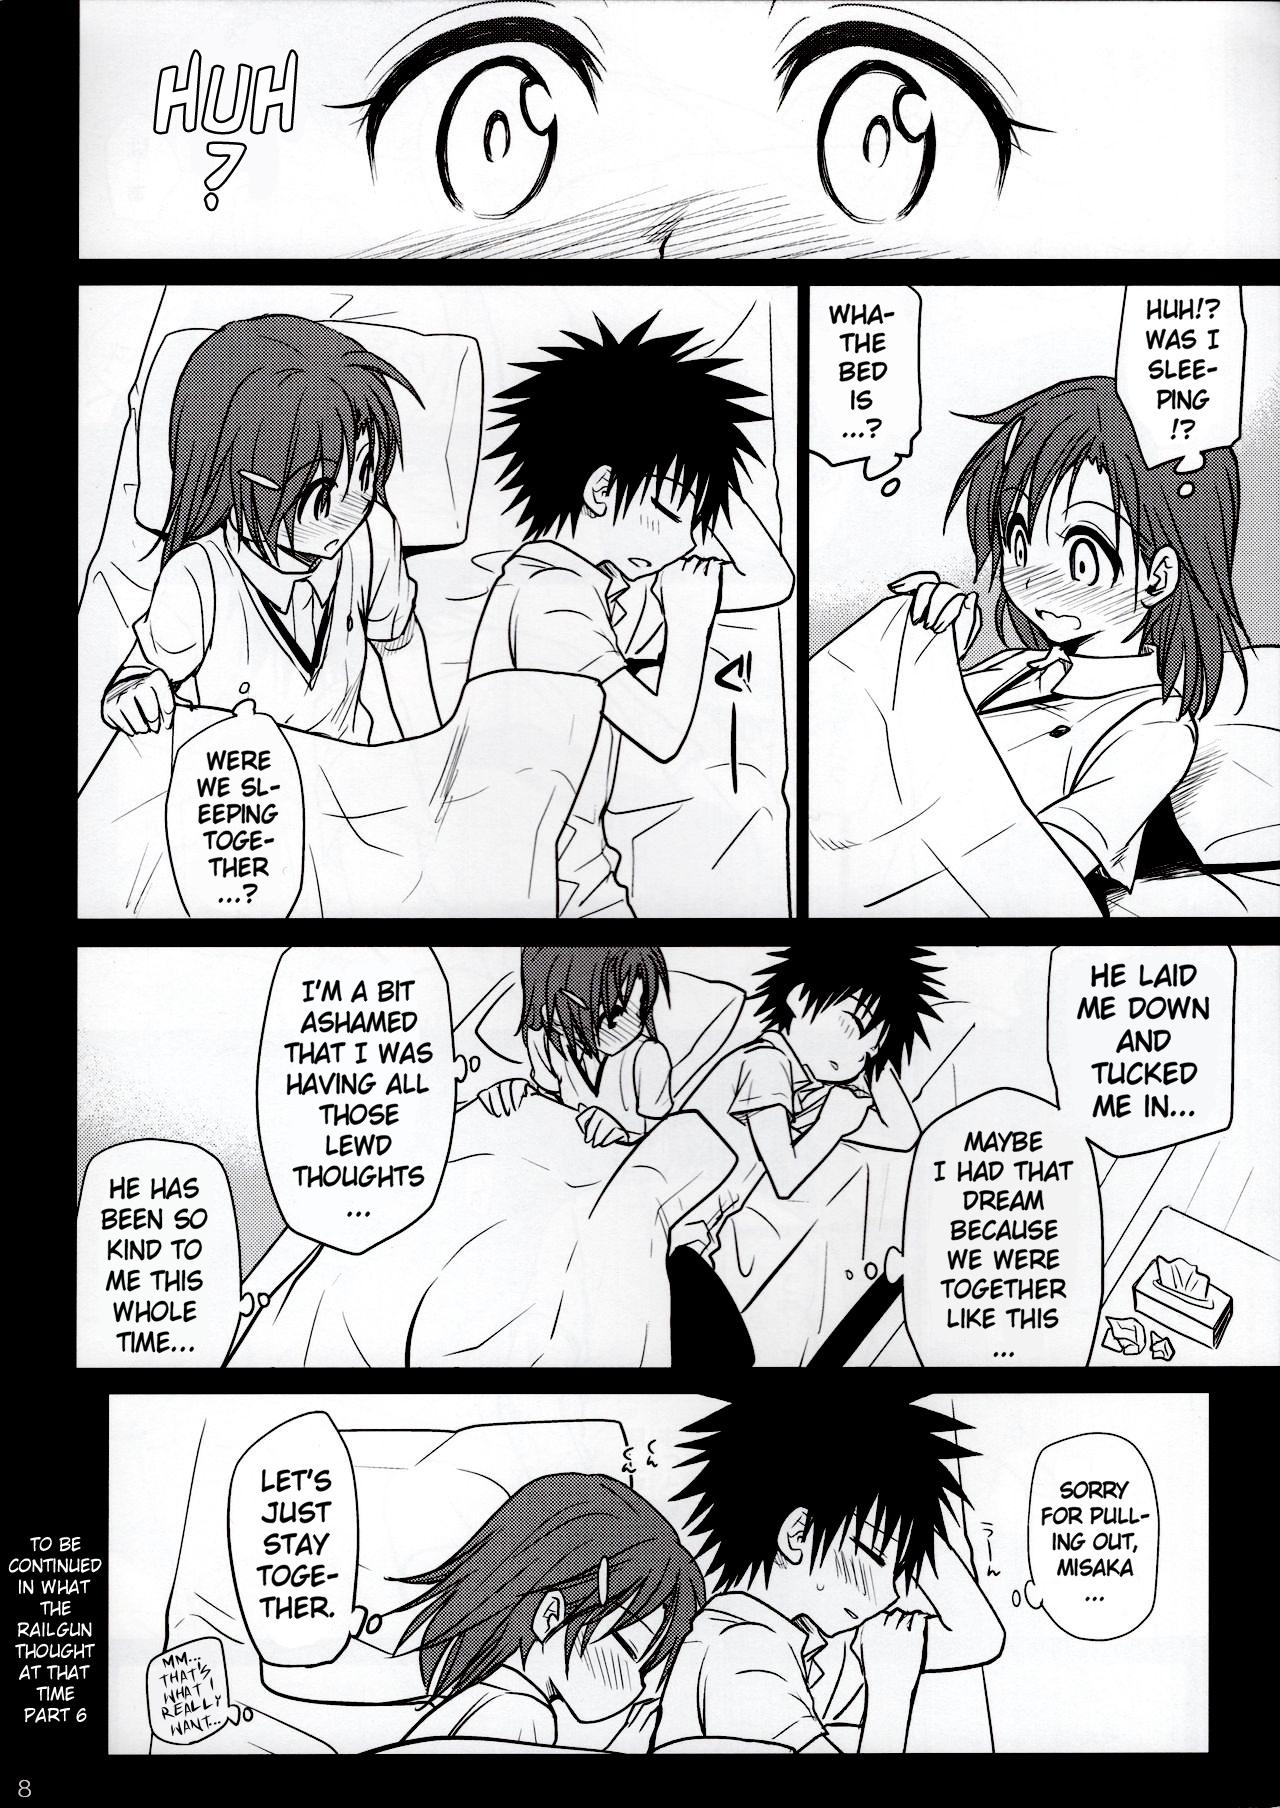 Workout What We Thought At That Time - Toaru majutsu no index | a certain magical index Milfporn - Page 8